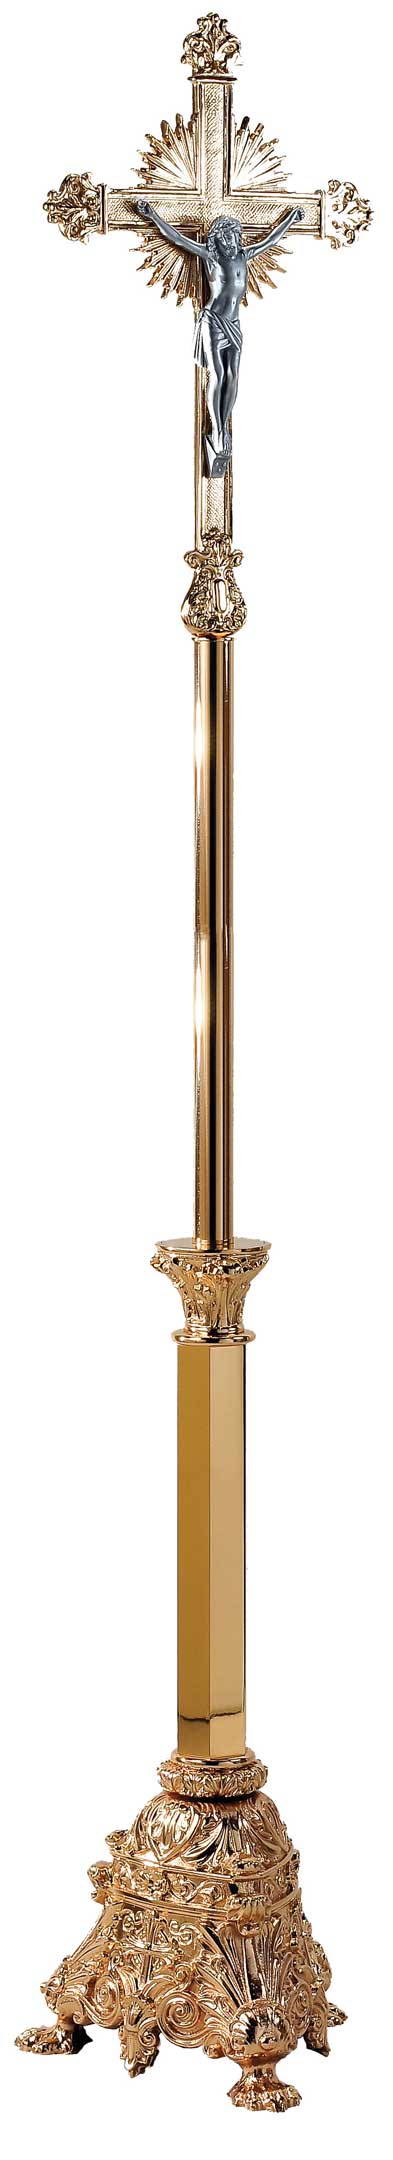 21PC80 Processional Crucifix and Stand